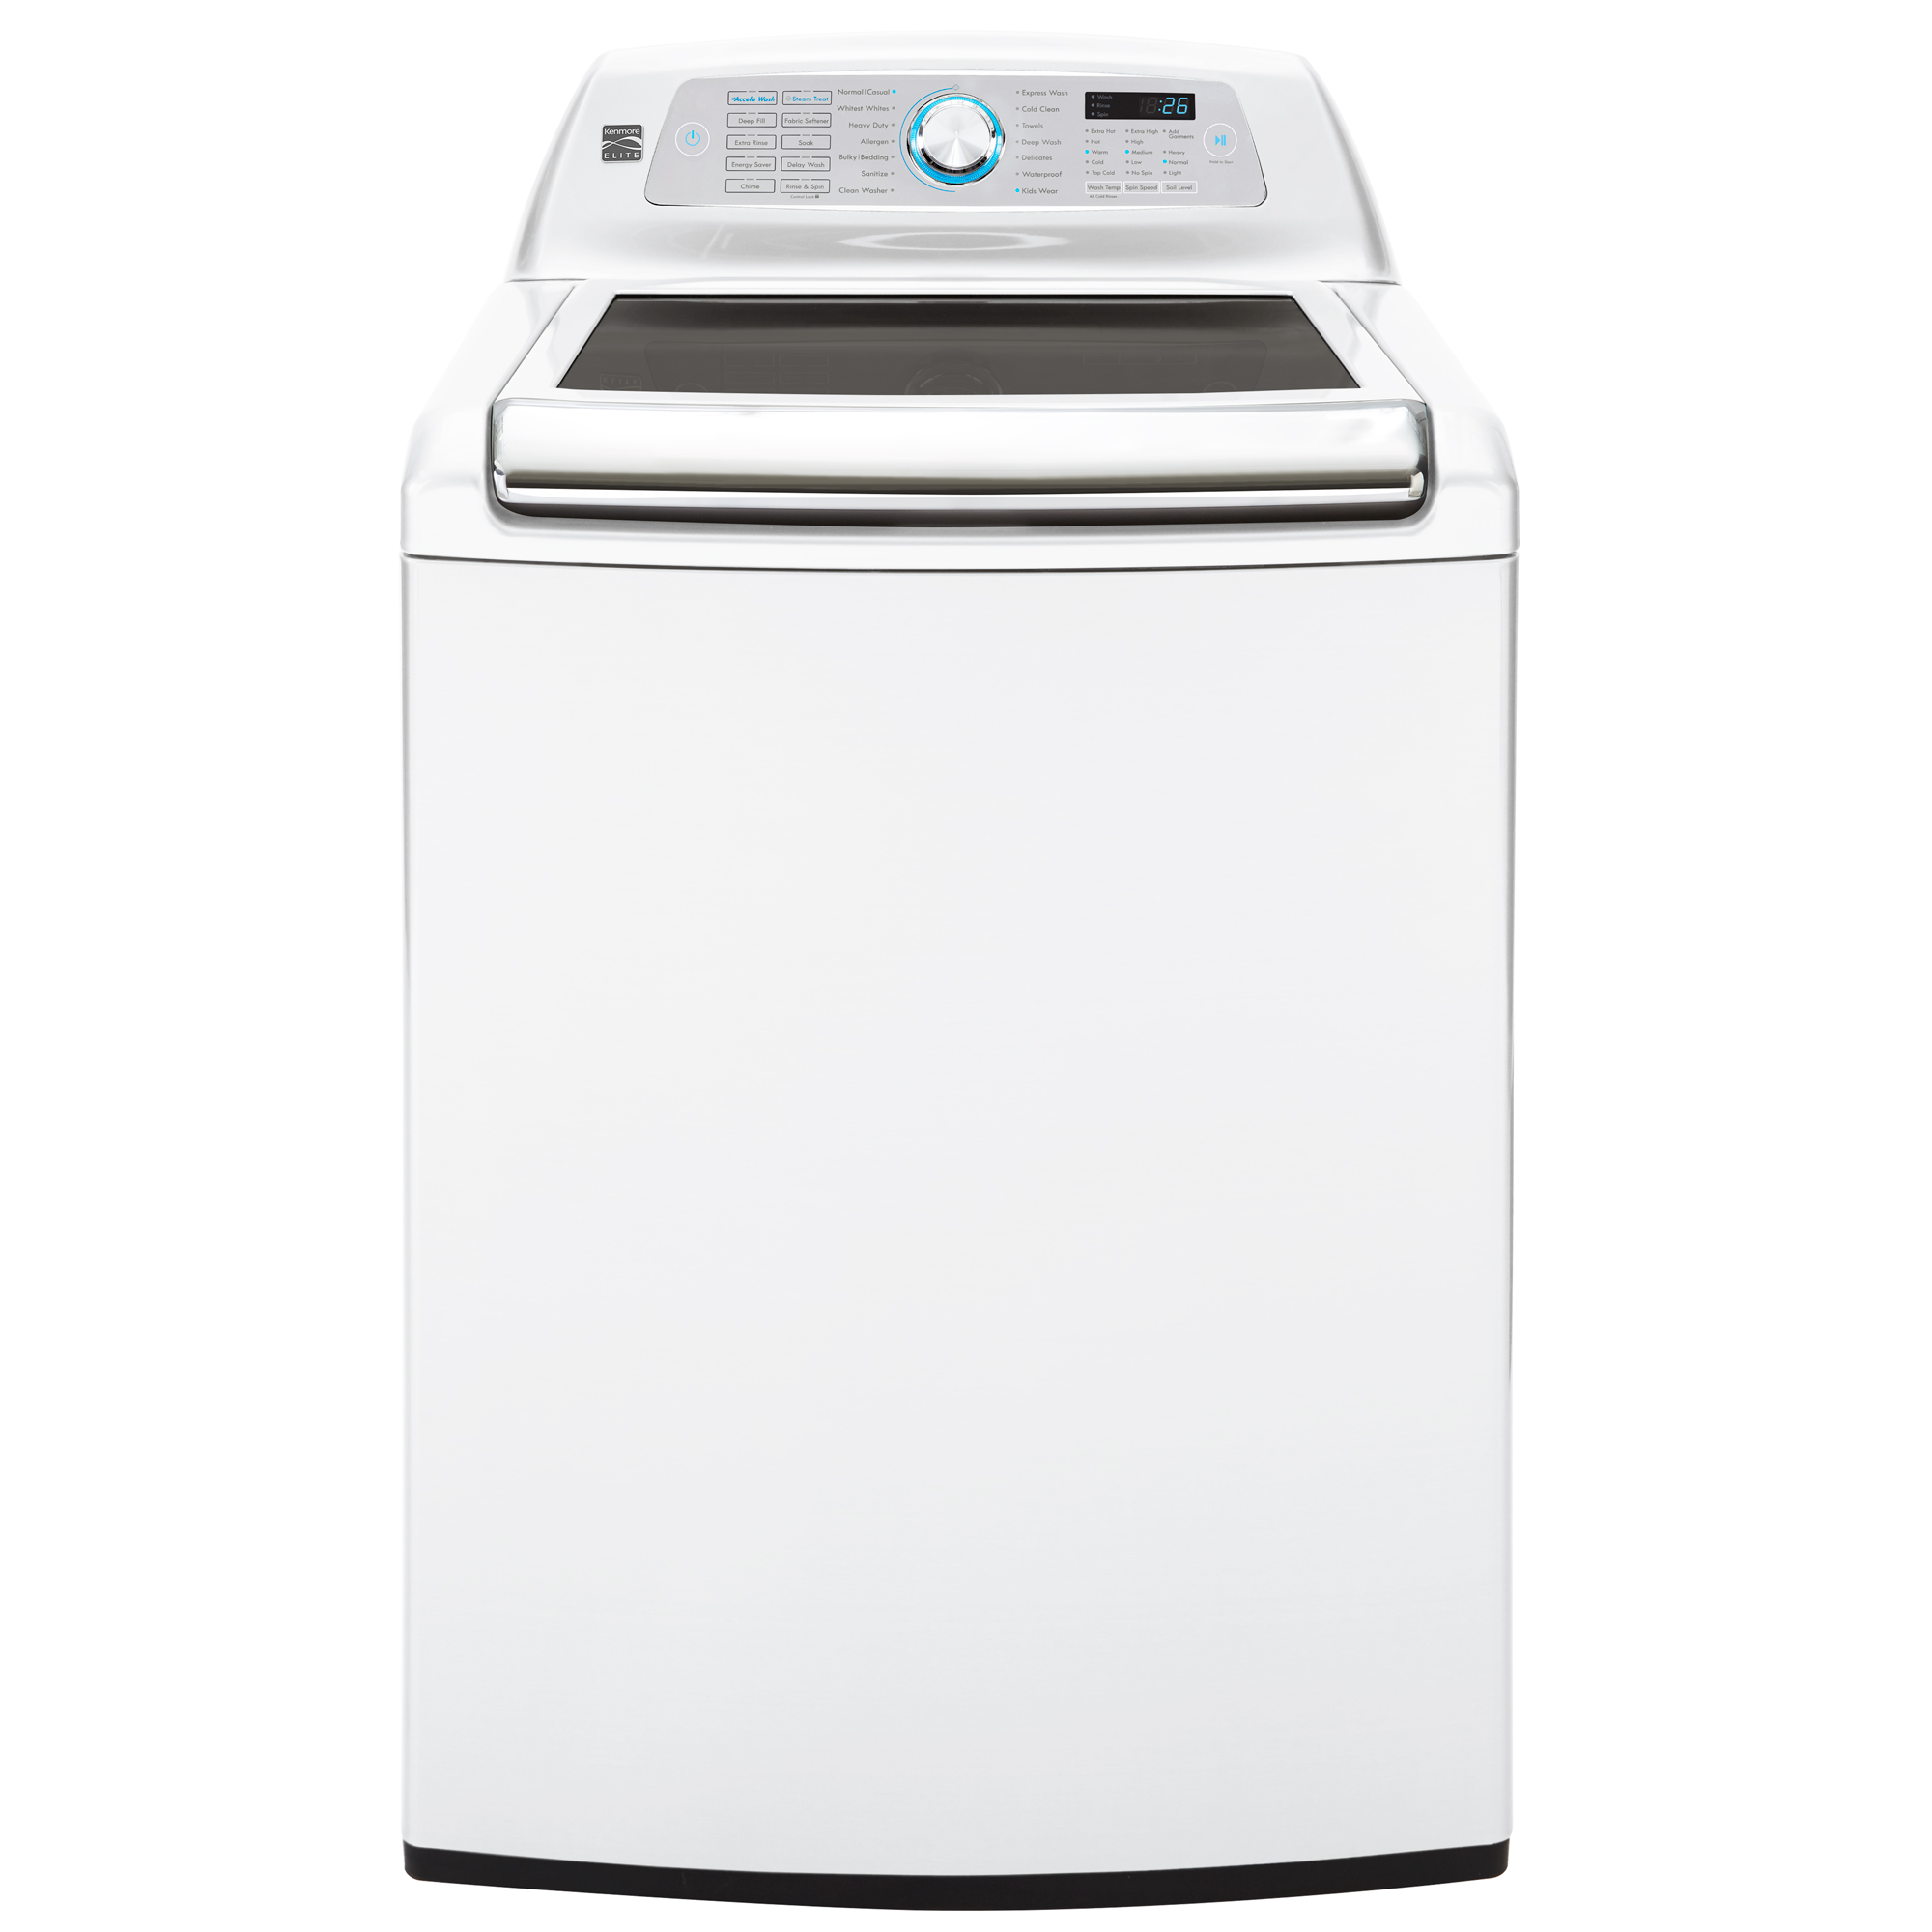 Kenmore Elite 31552 5 2 Cu Ft Top Load Washer W Steam Accela Wash White,Smoked Ham Rump Portion